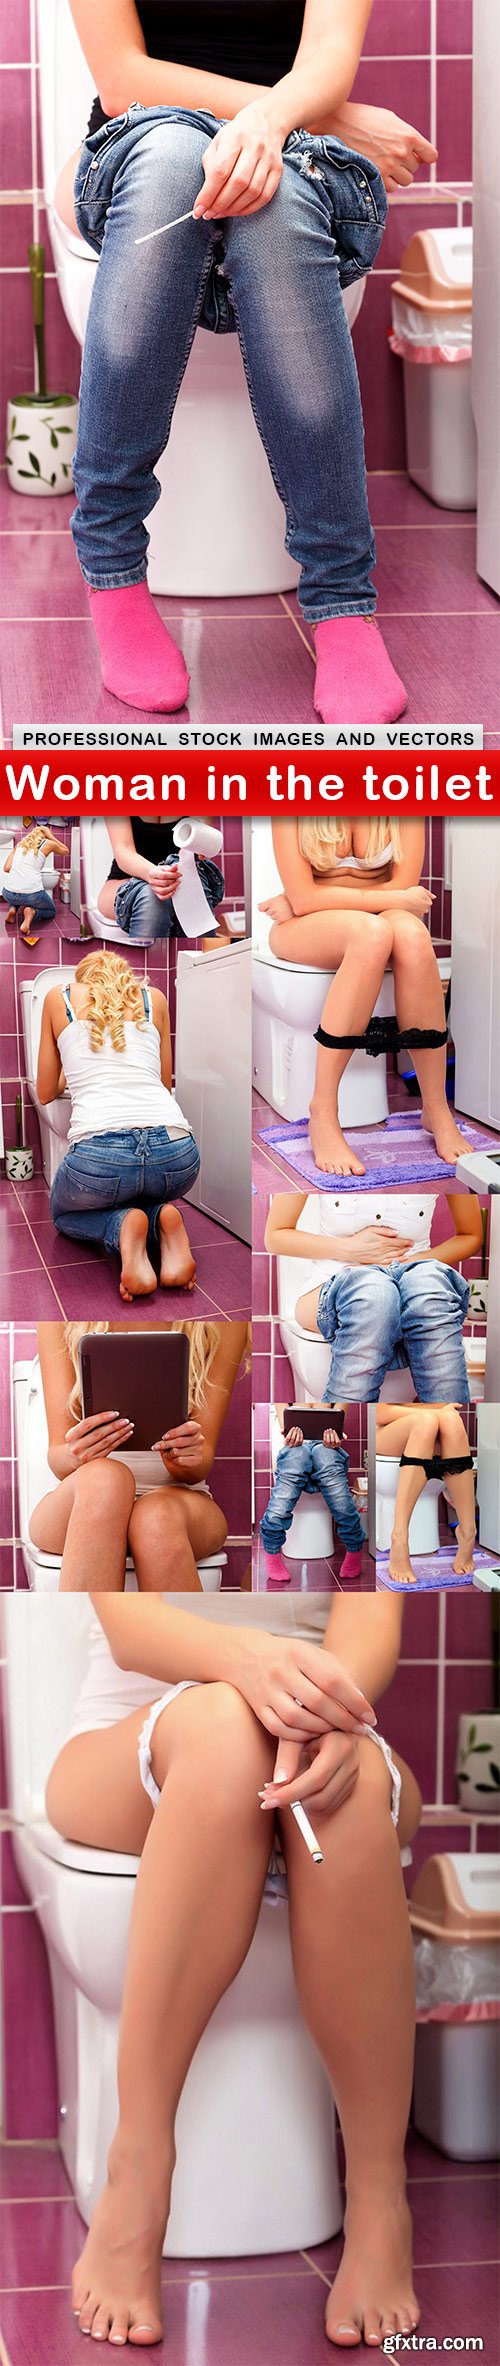 Woman in the toilet - 10 UHQ JPEG